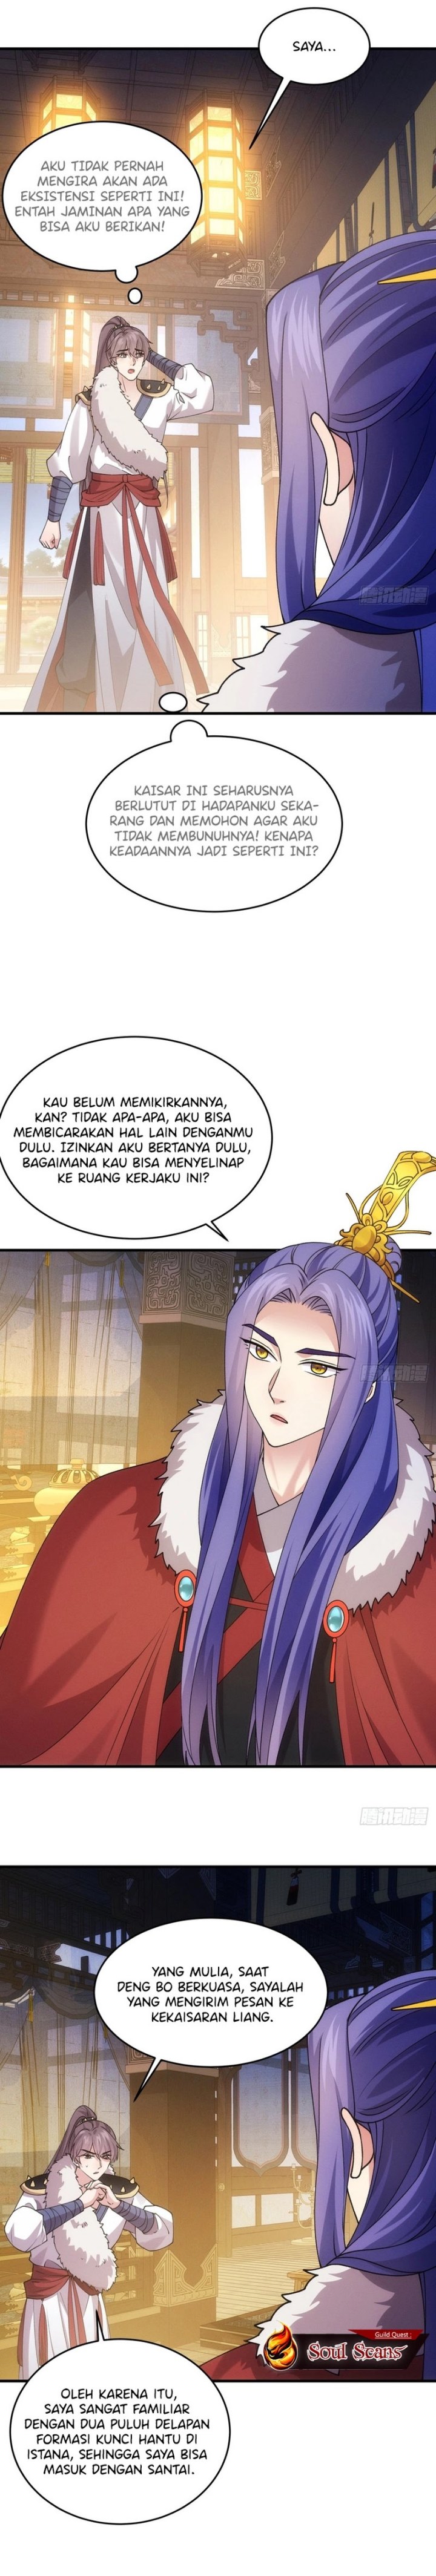 Dilarang COPAS - situs resmi www.mangacanblog.com - Komik i just dont play the card according to the routine 193 - chapter 193 194 Indonesia i just dont play the card according to the routine 193 - chapter 193 Terbaru 9|Baca Manga Komik Indonesia|Mangacan